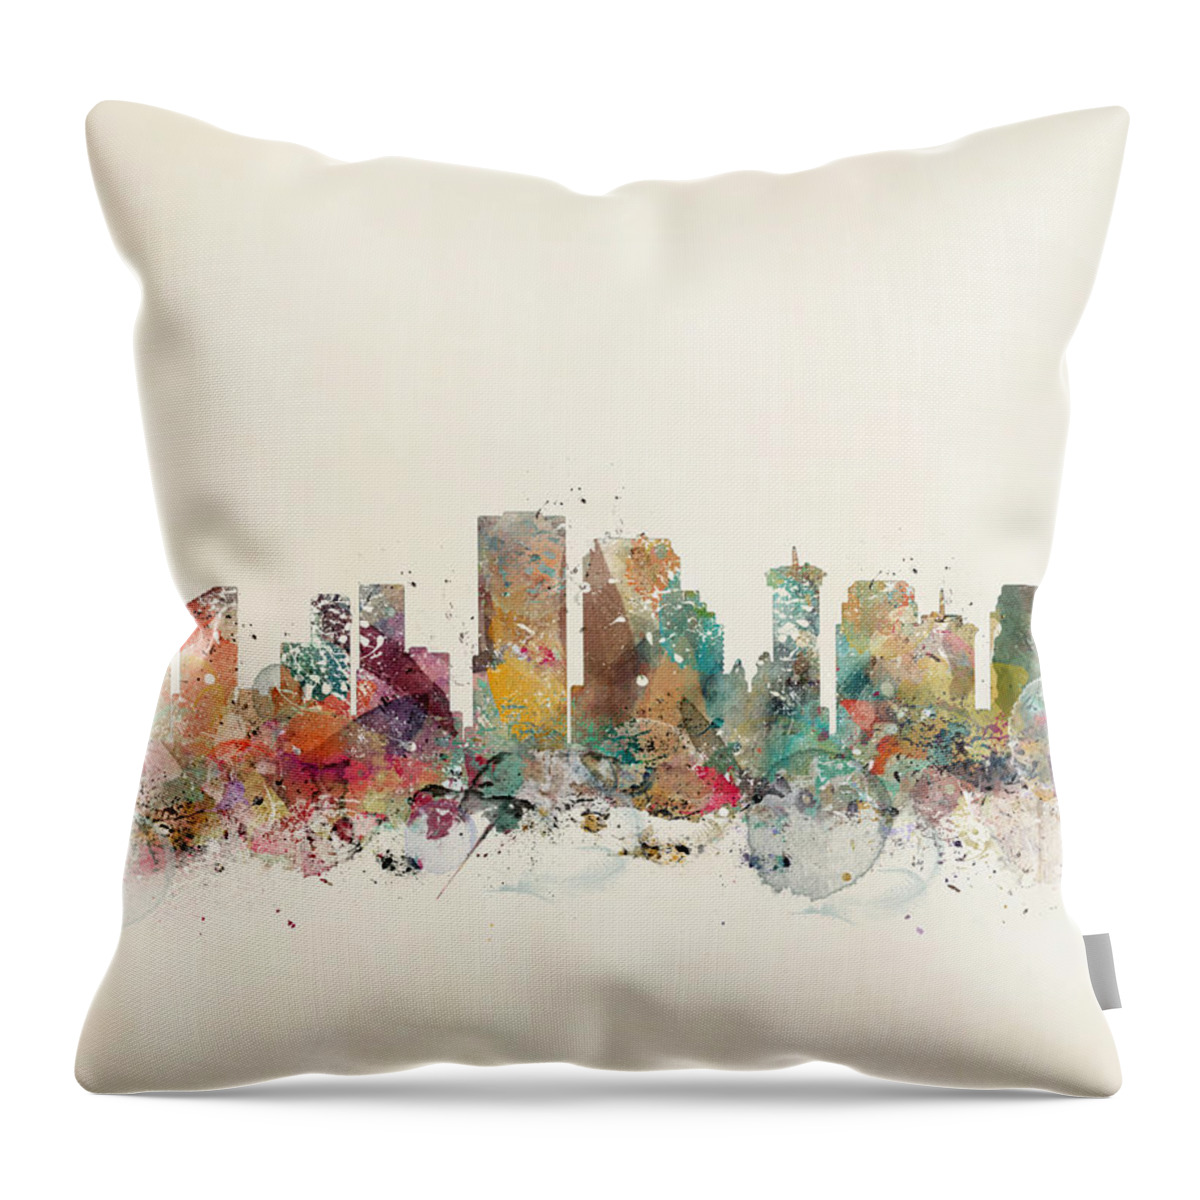 New Orleans Louisiana Throw Pillow featuring the painting New Orleans by Bri Buckley